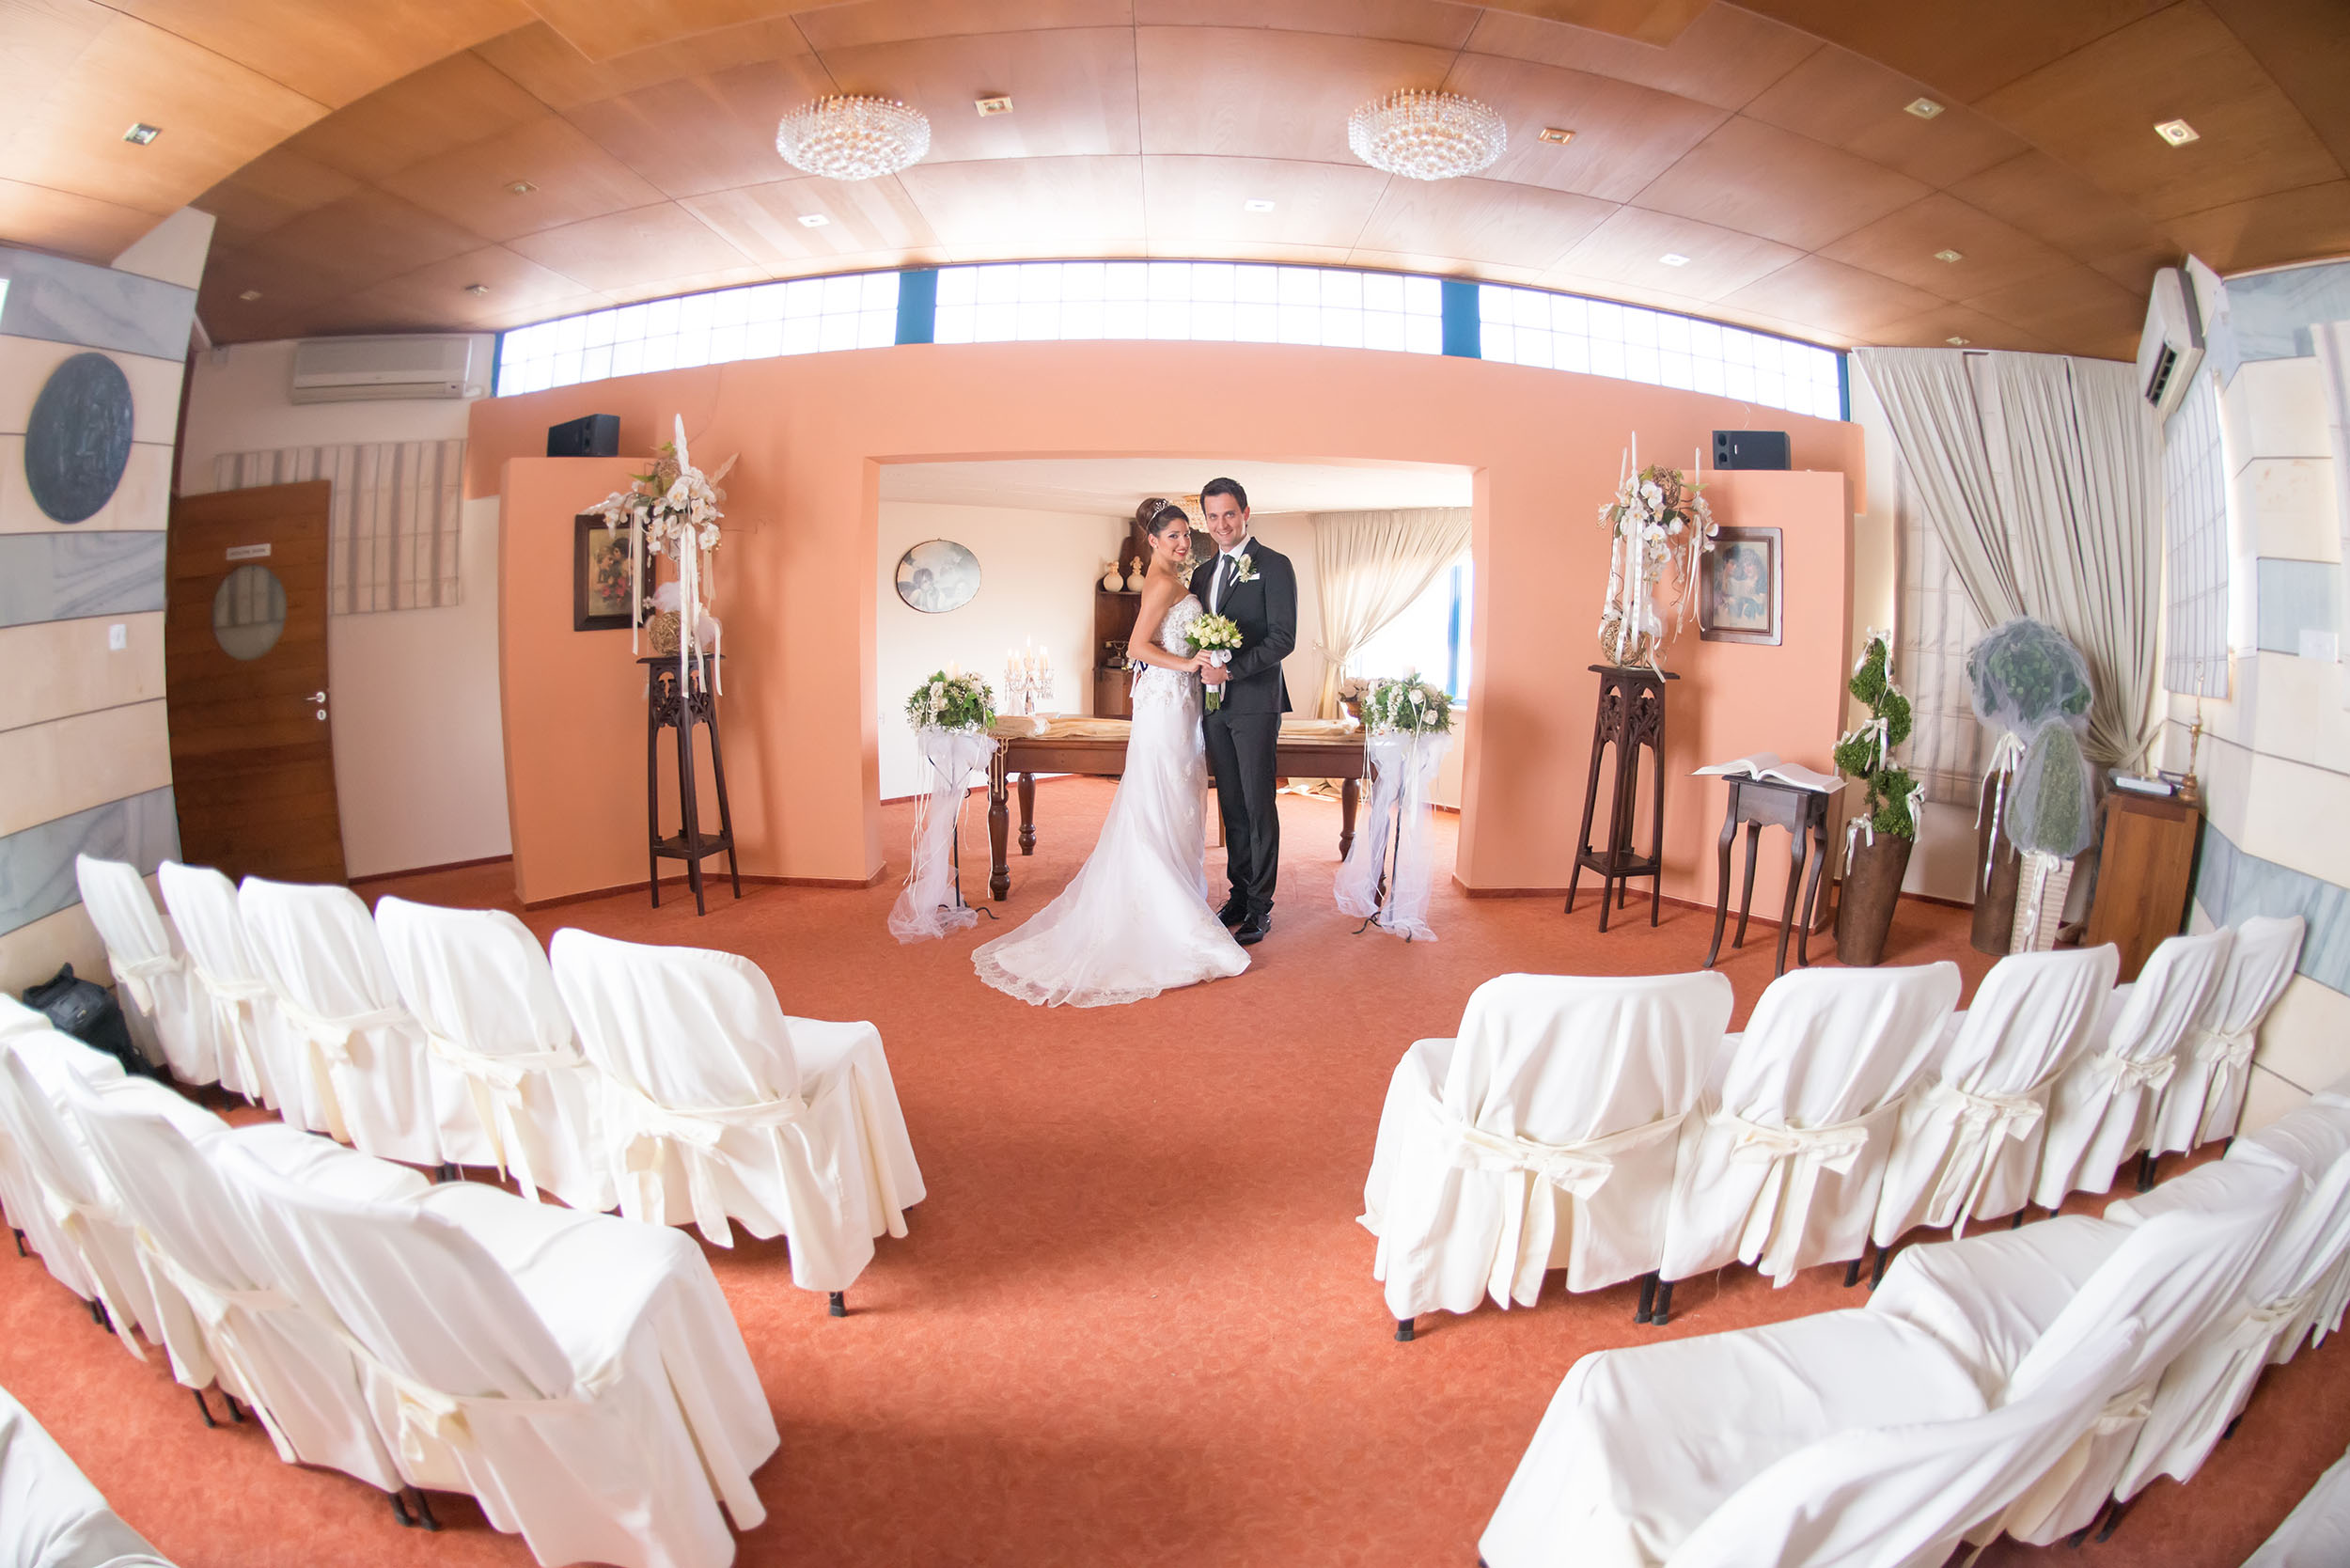 Book your wedding day in Ayia Napa Town Hall